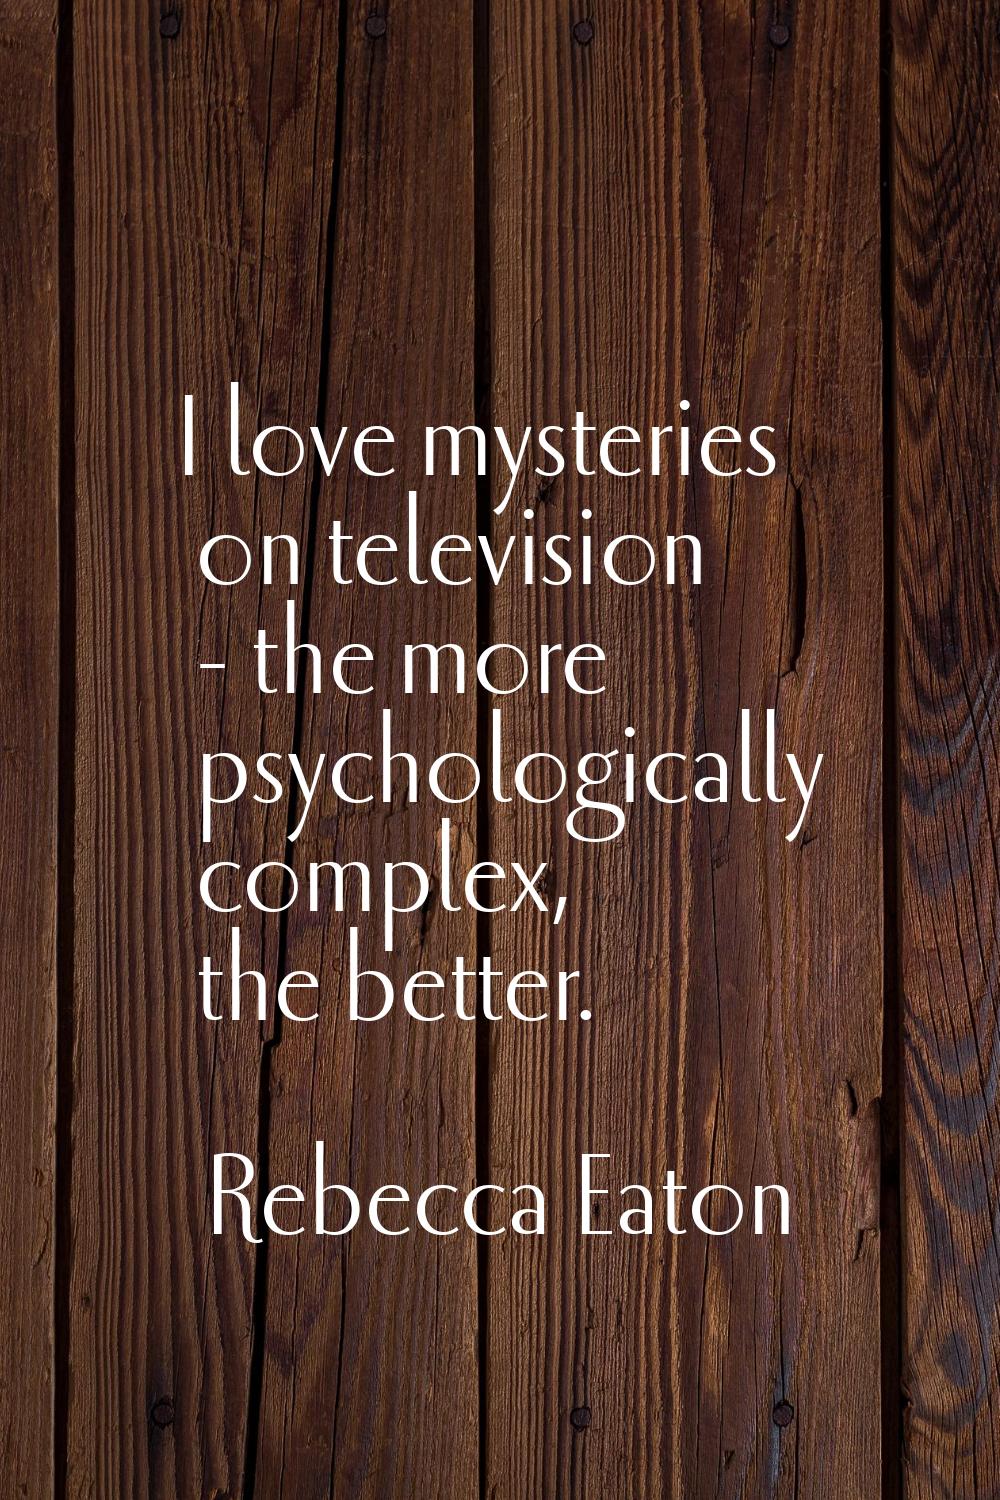 I love mysteries on television - the more psychologically complex, the better.